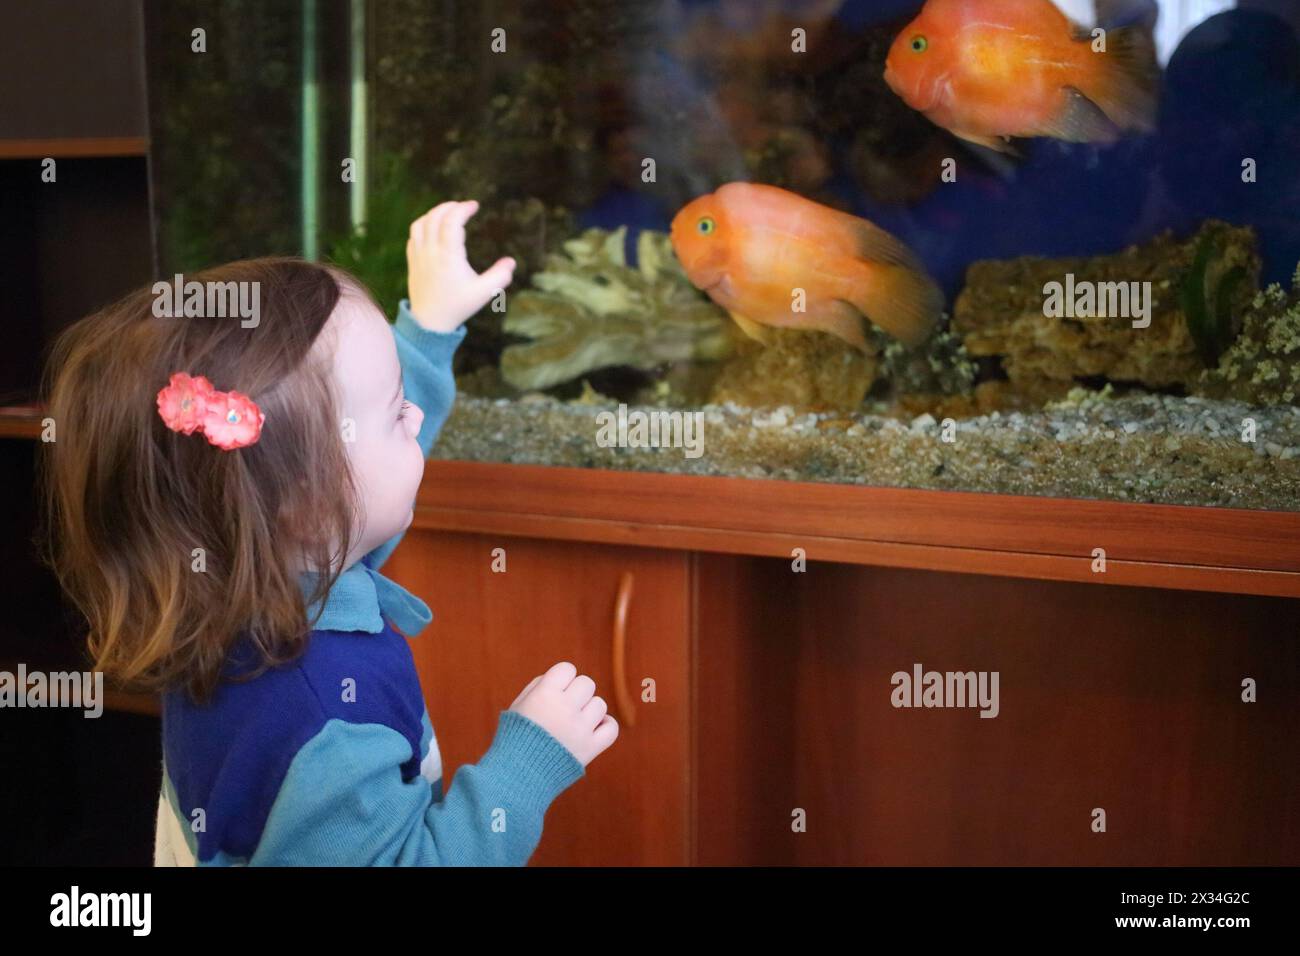 Little girl looks at the big red fish in an aquarium, side view Stock Photo